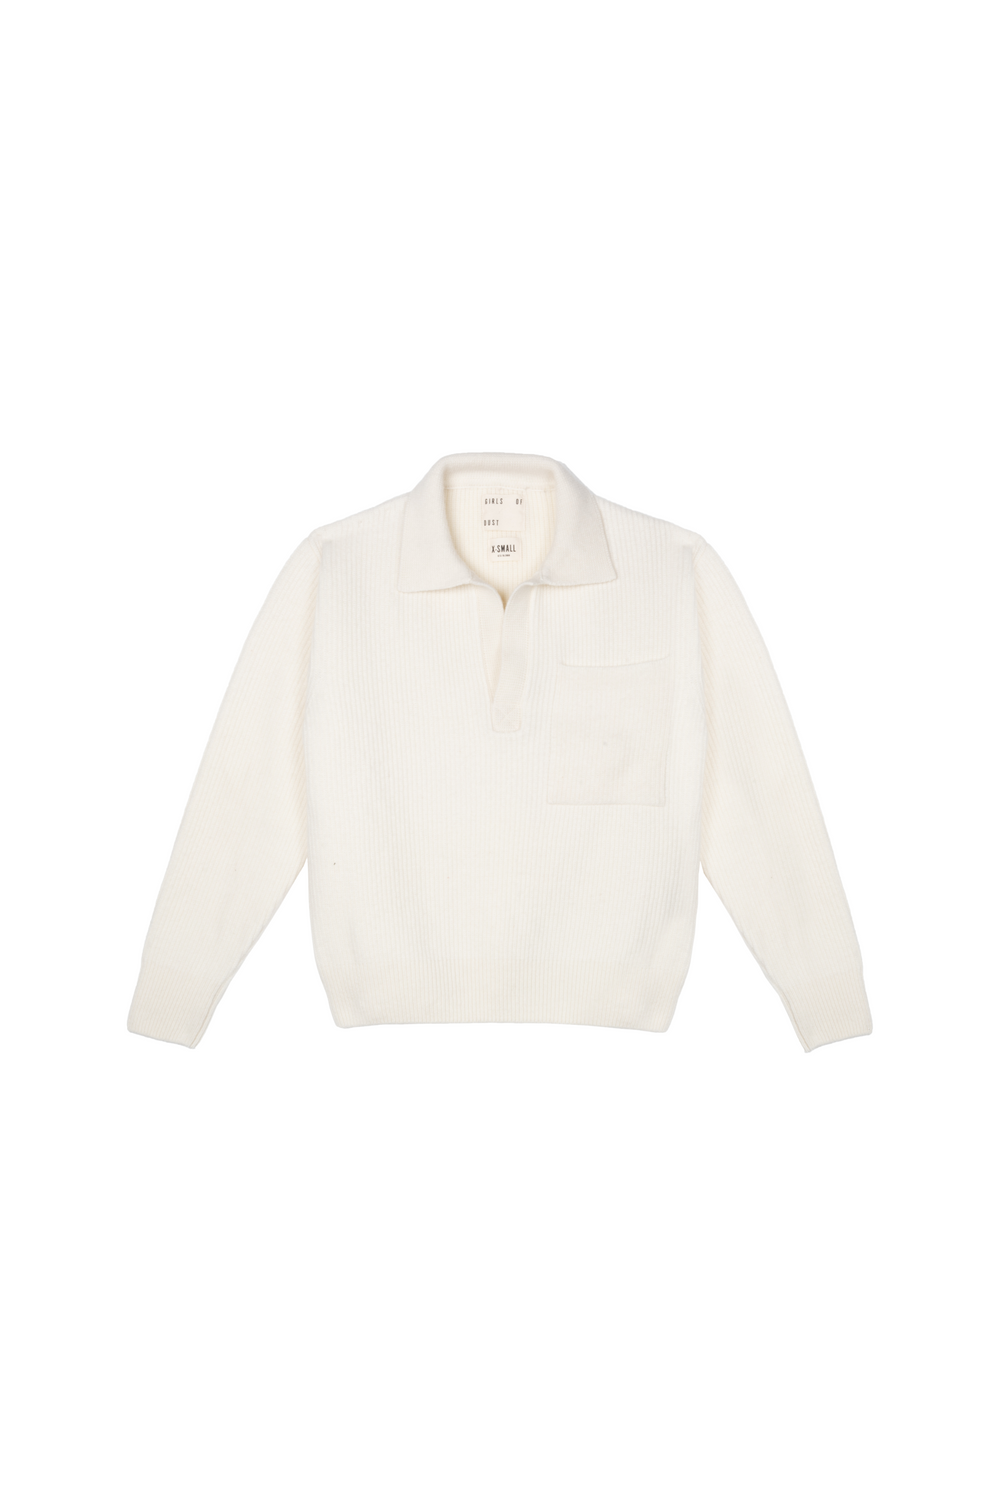 G.O.D RUGBY SWEATER DELTA OFF WHITE